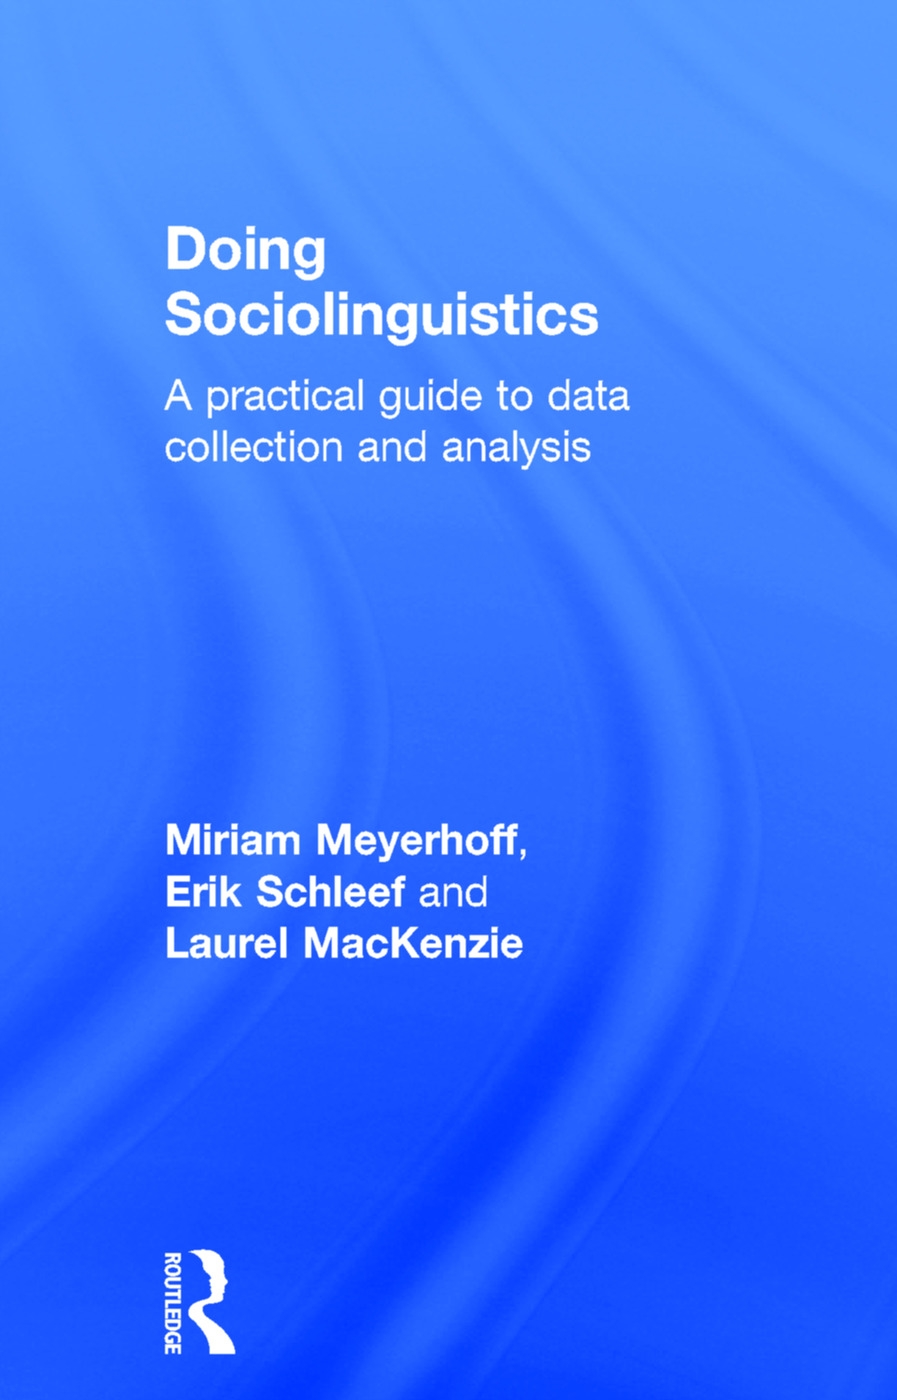 Doing Sociolinguistics: A Practical Guide to Data Collection and Analysis